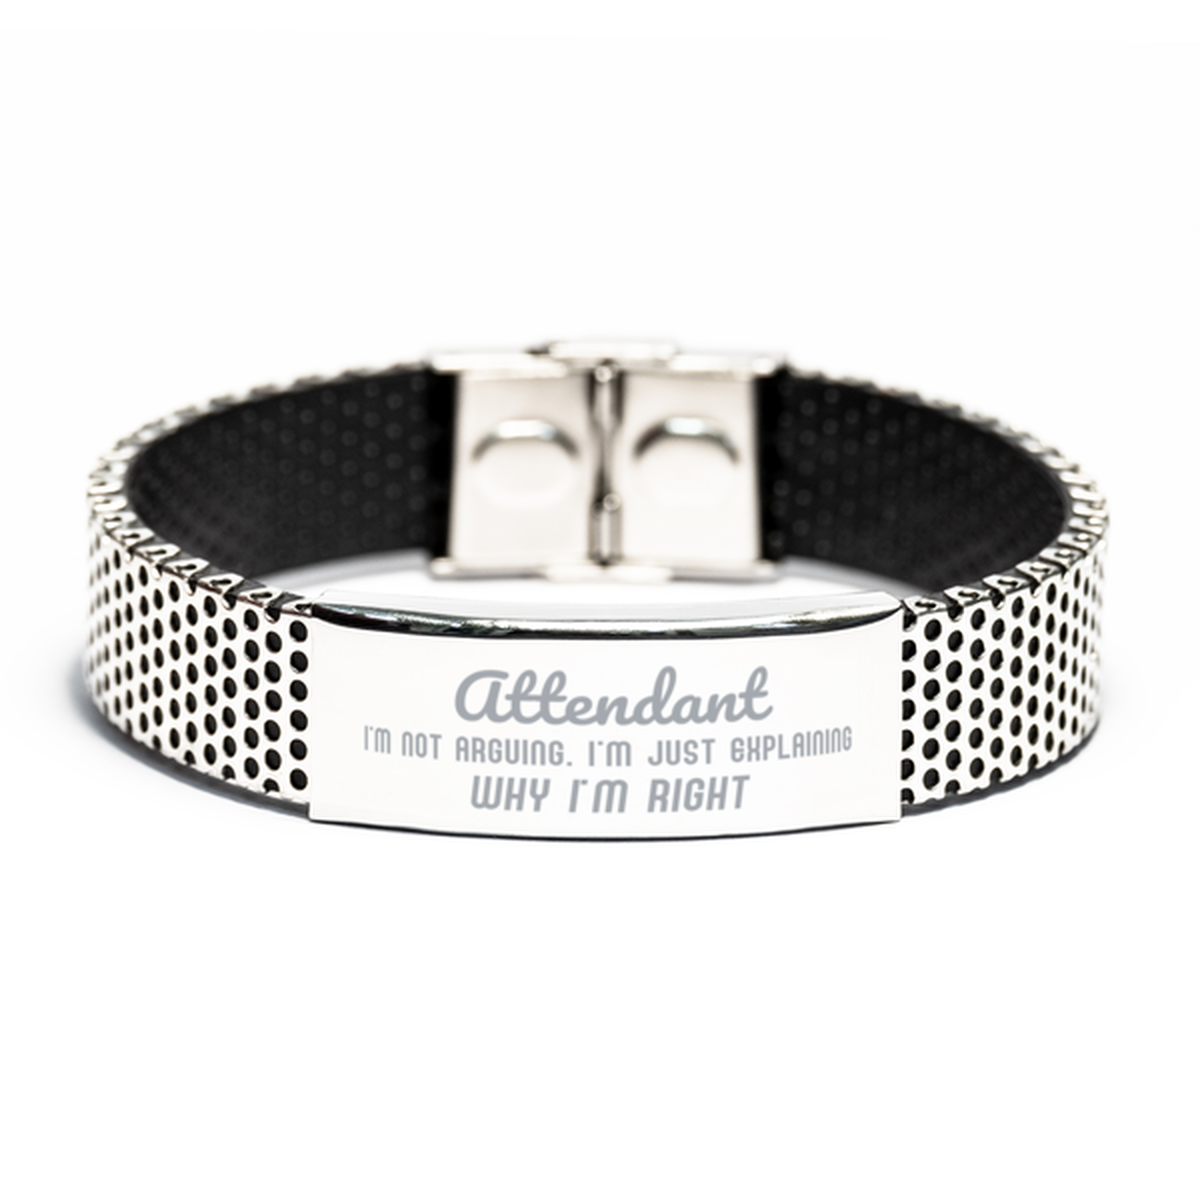 Attendant I'm not Arguing. I'm Just Explaining Why I'm RIGHT Stainless Steel Bracelet, Funny Saying Quote Attendant Gifts For Attendant Graduation Birthday Christmas Gifts for Men Women Coworker